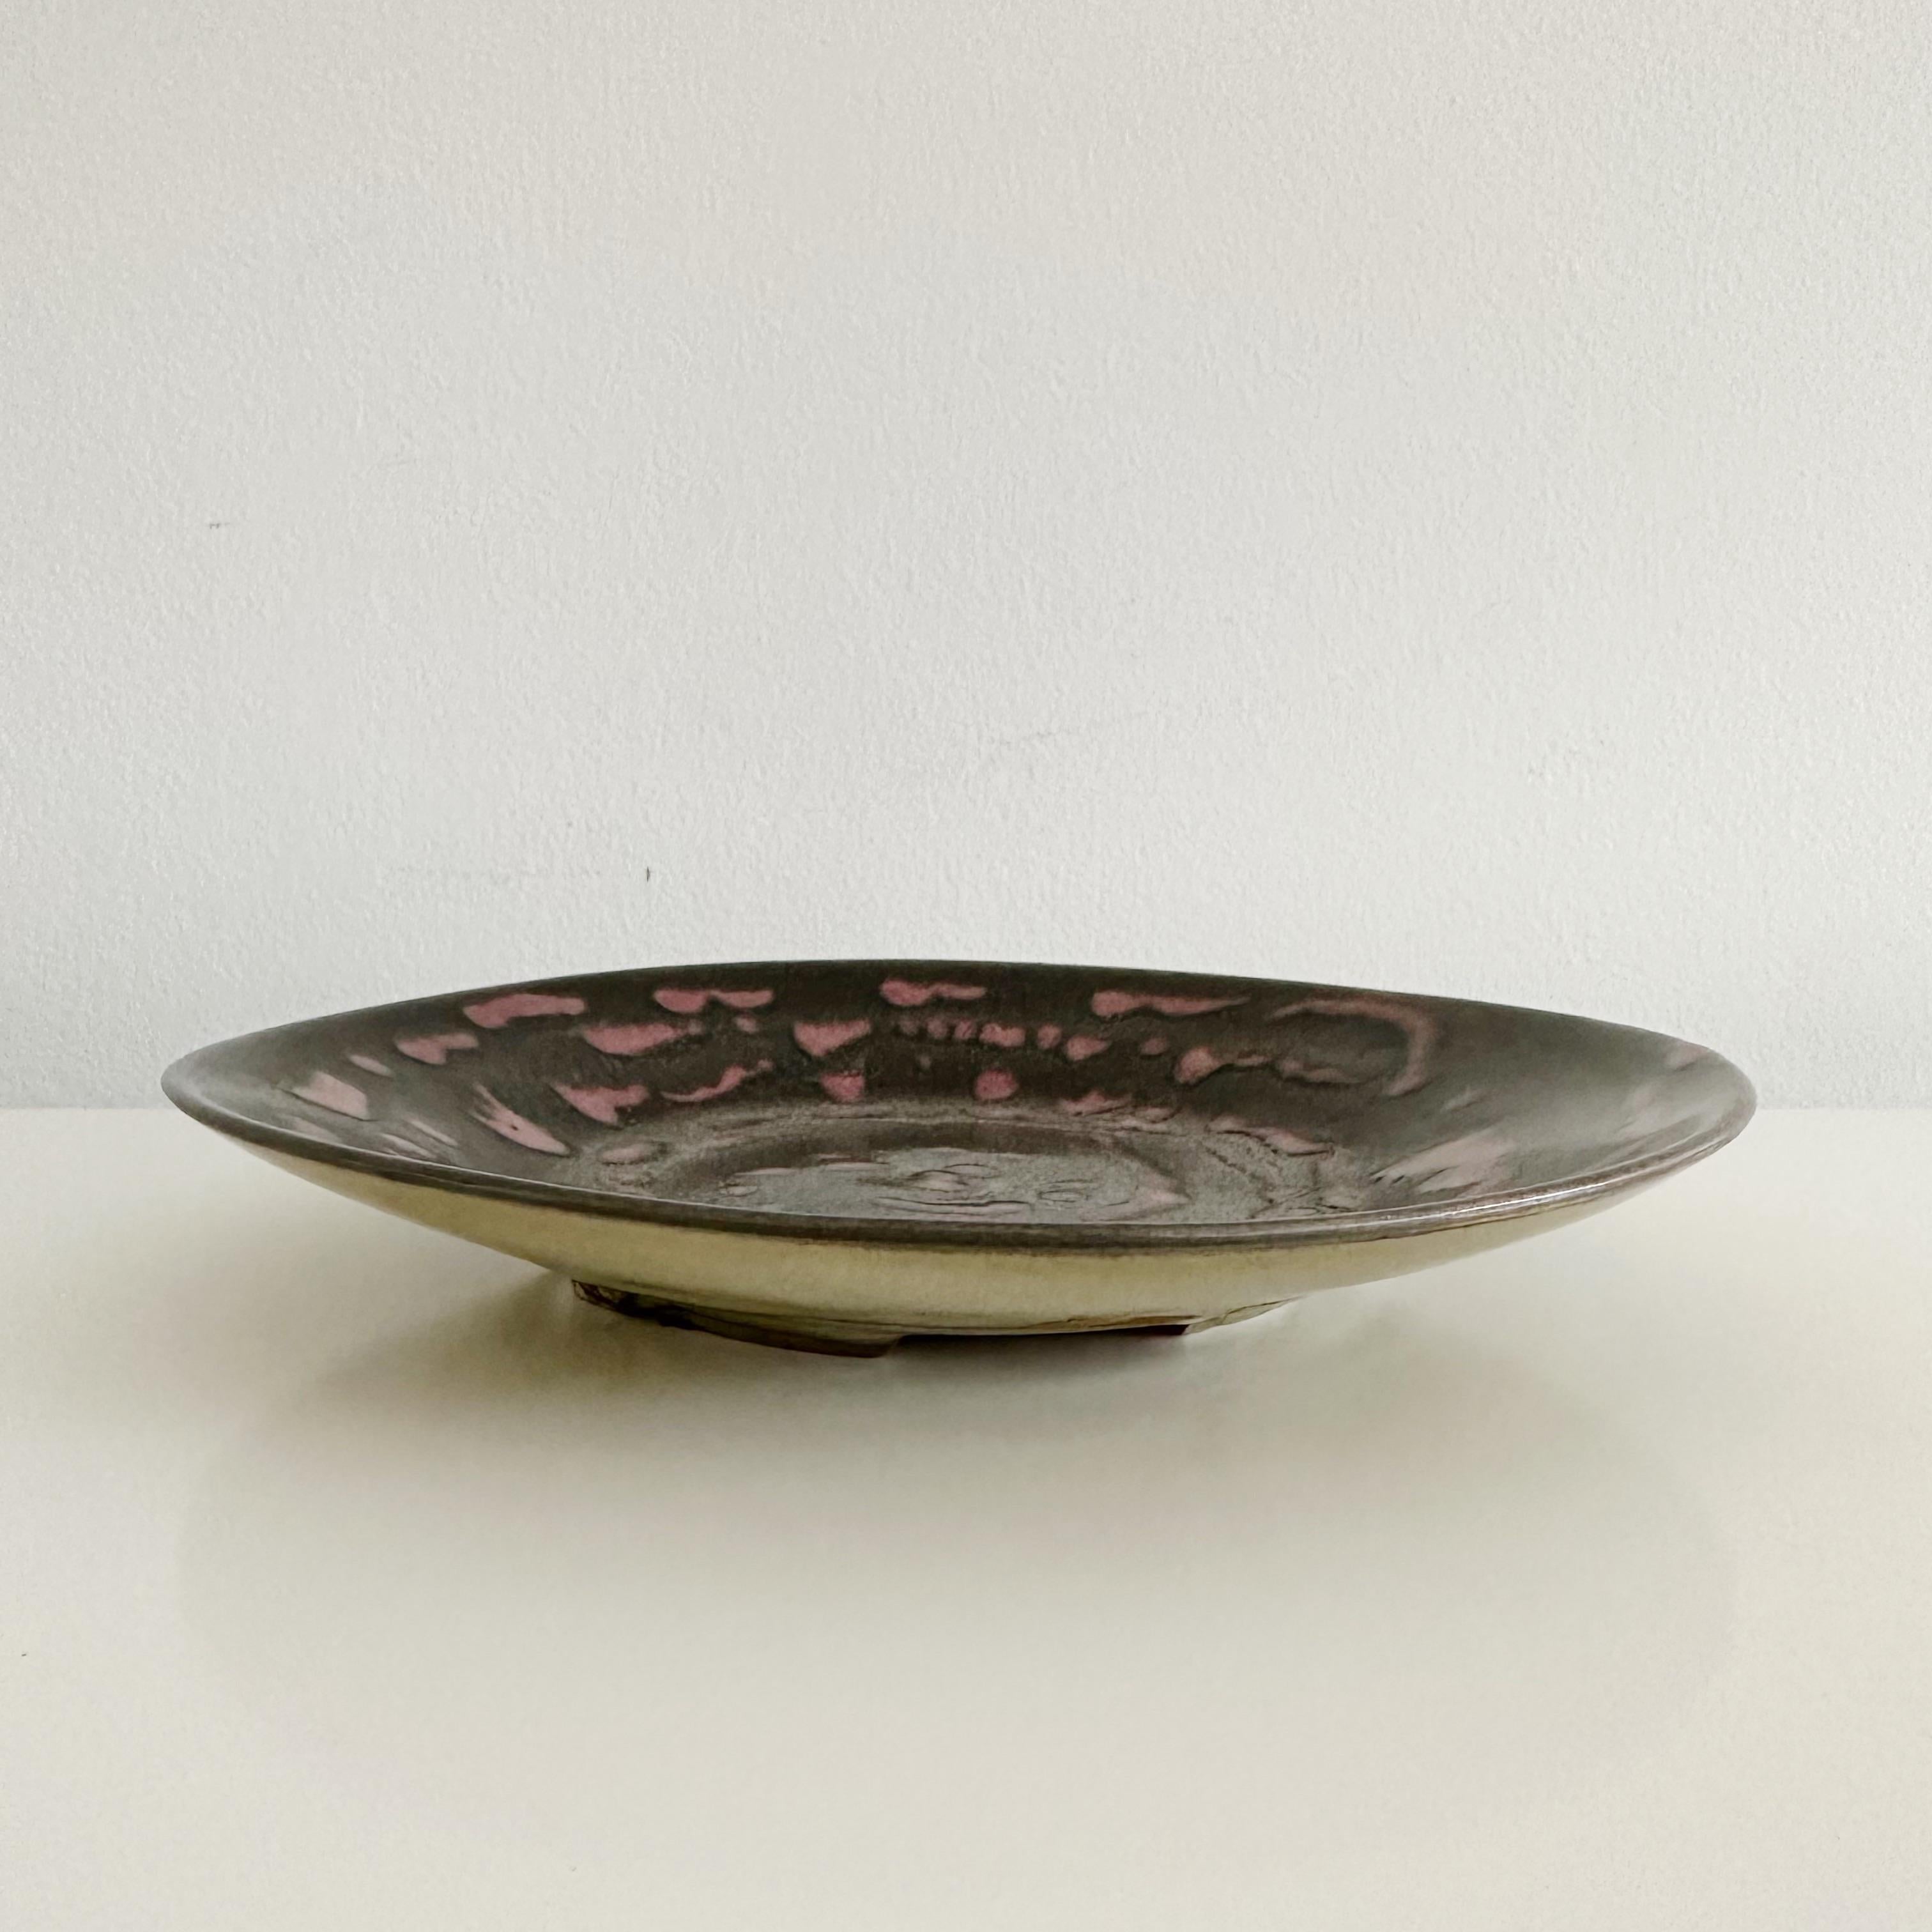 Hand made glazed studio pottery shallow bowl or plate by Amelie (Amely, Aly) Richter, in plum, lavender and black ues. Signed Aly Richter on underside.

Before her marriage to Dr Georg Martin Richter, in November of 1920, naturalised American